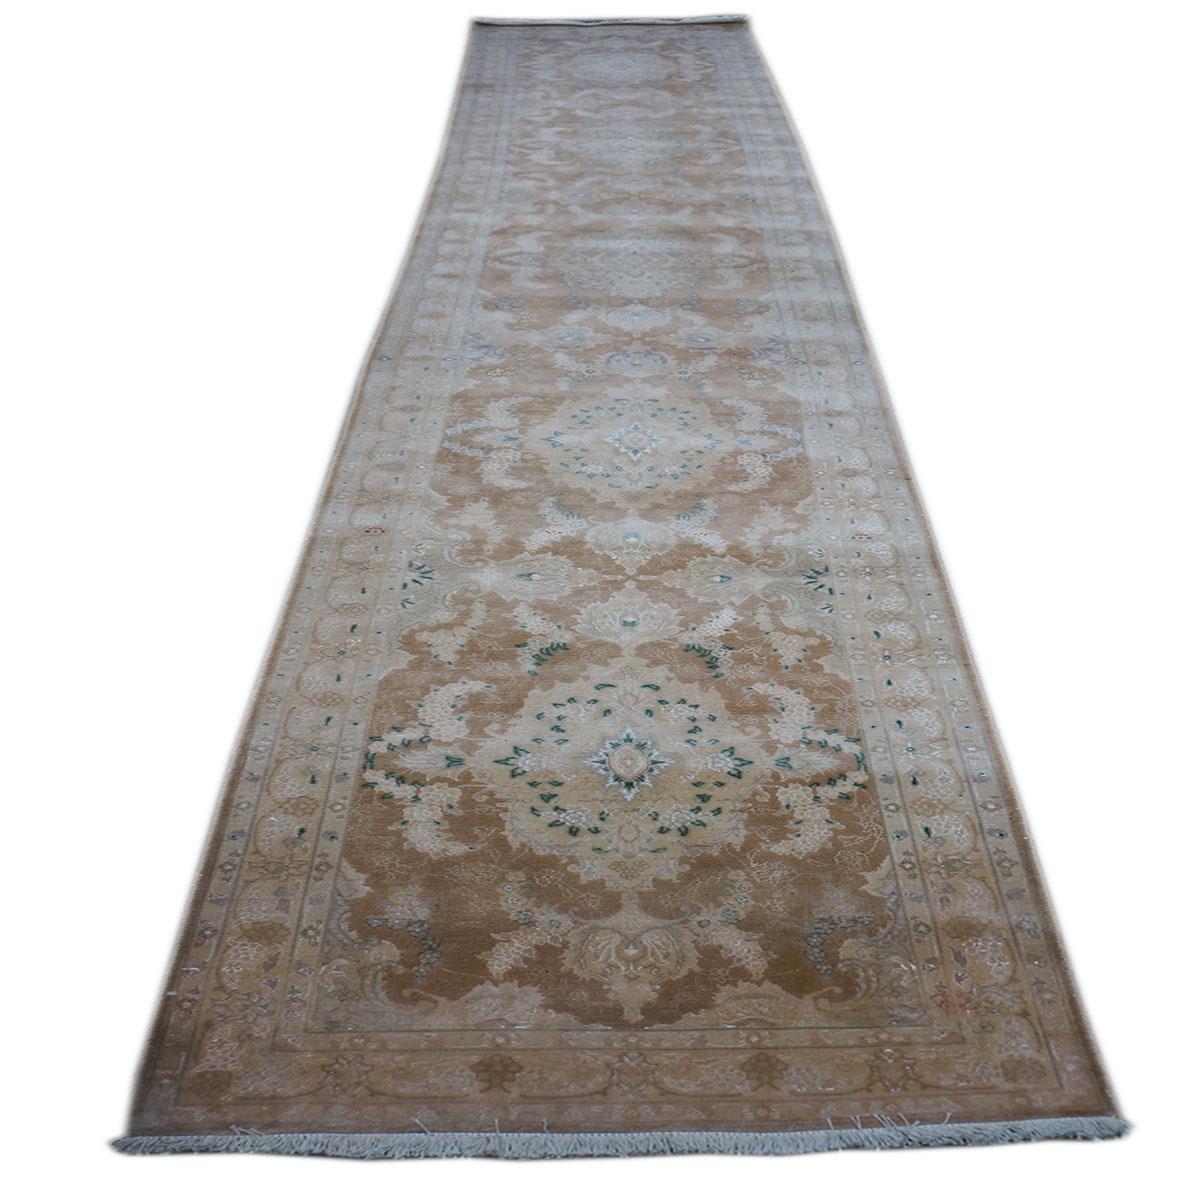 Wool & Silk Persian Tabriz 3x16 Tan, Brown, & Green Handmade Hall Runner Rug In Good Condition For Sale In Houston, TX